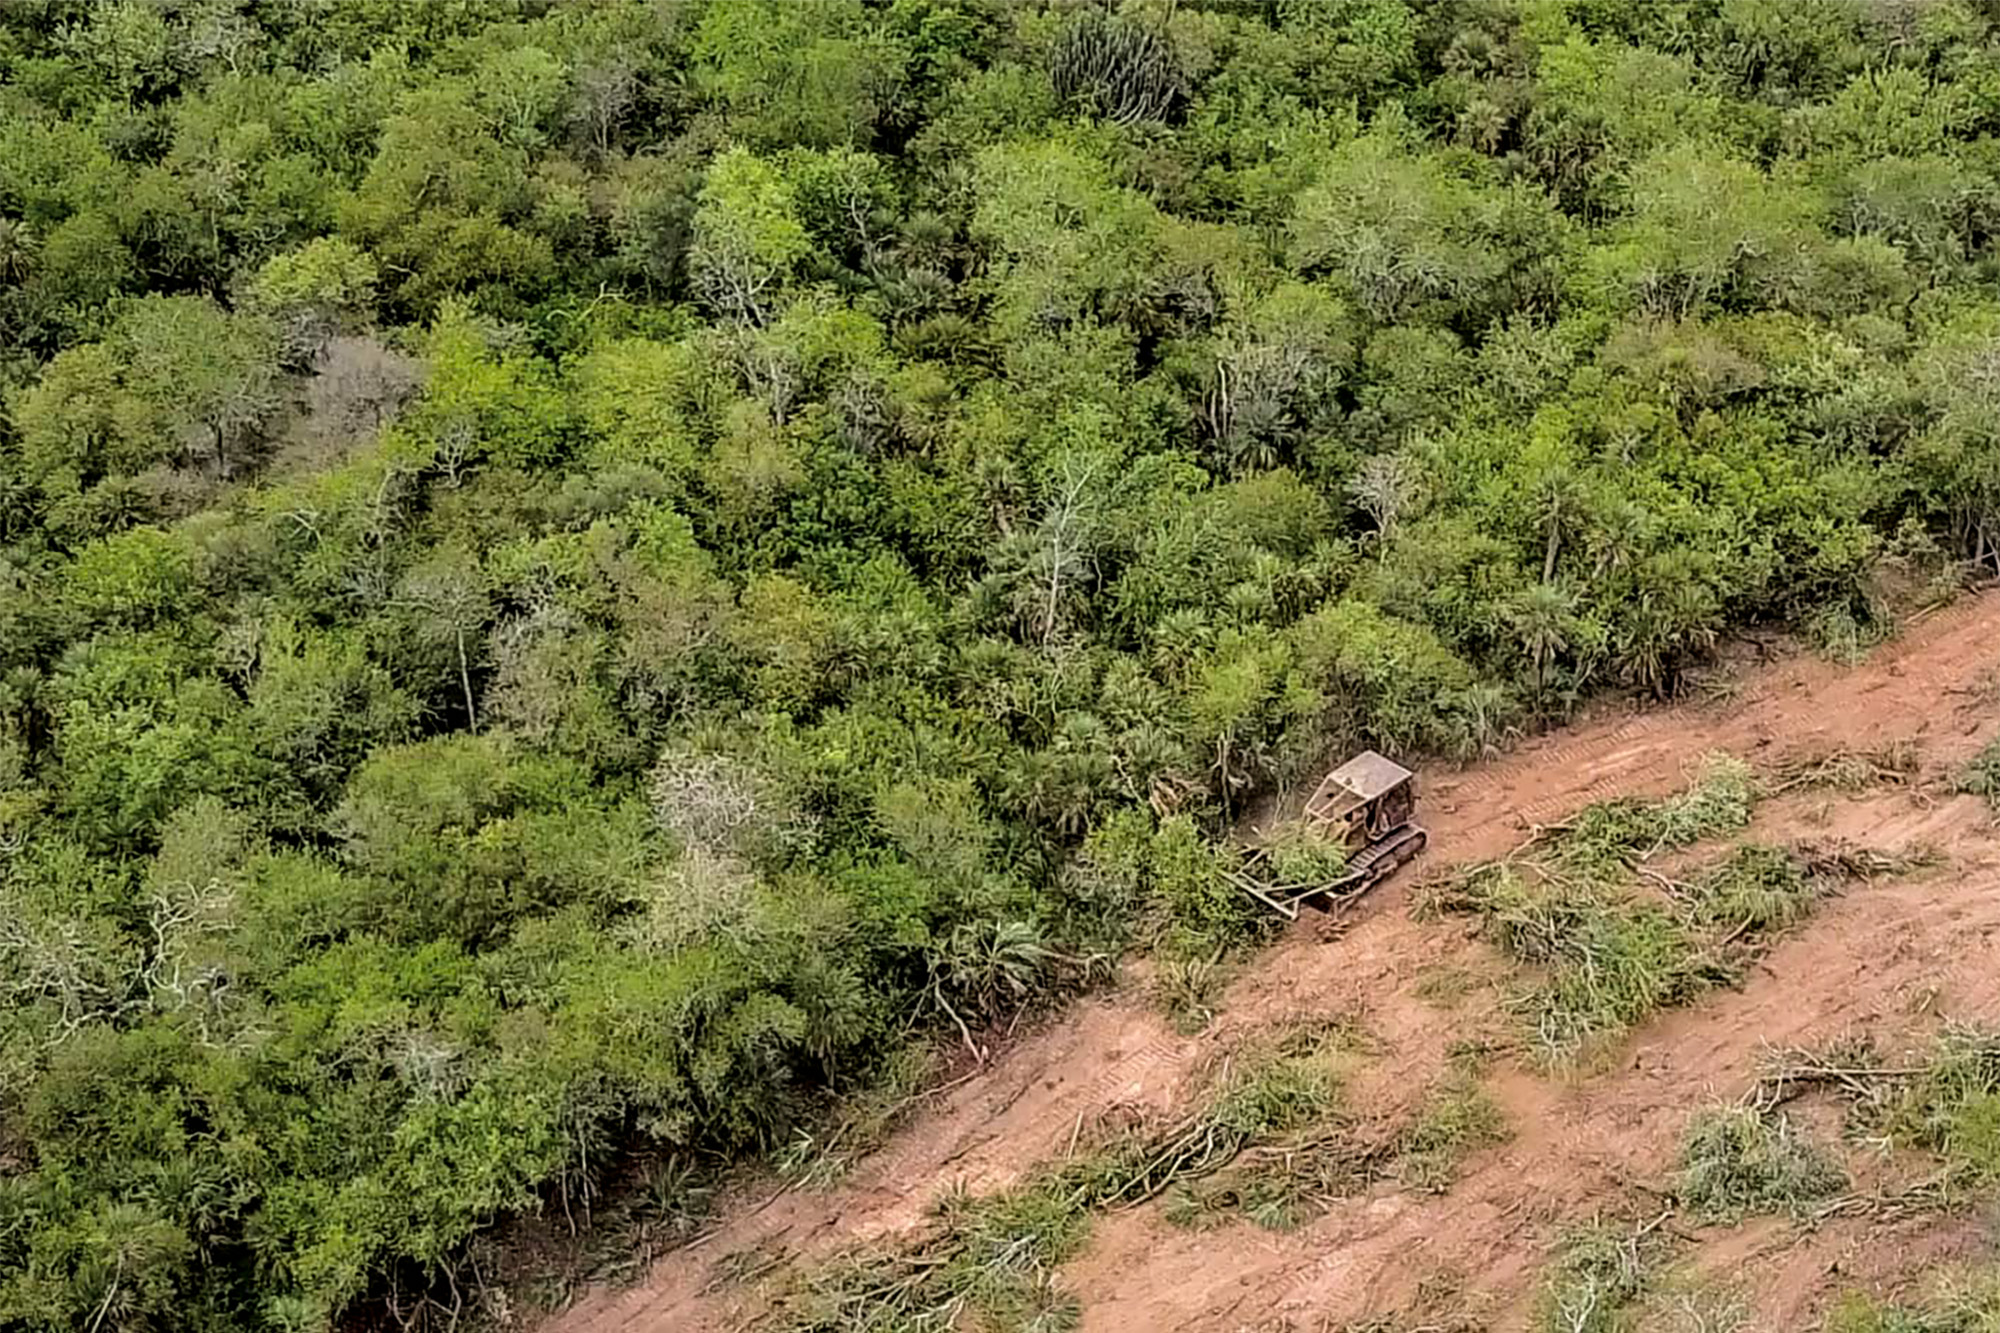 How Beef and Leather Supply Chains Pose Threat to South America’s Last Forest